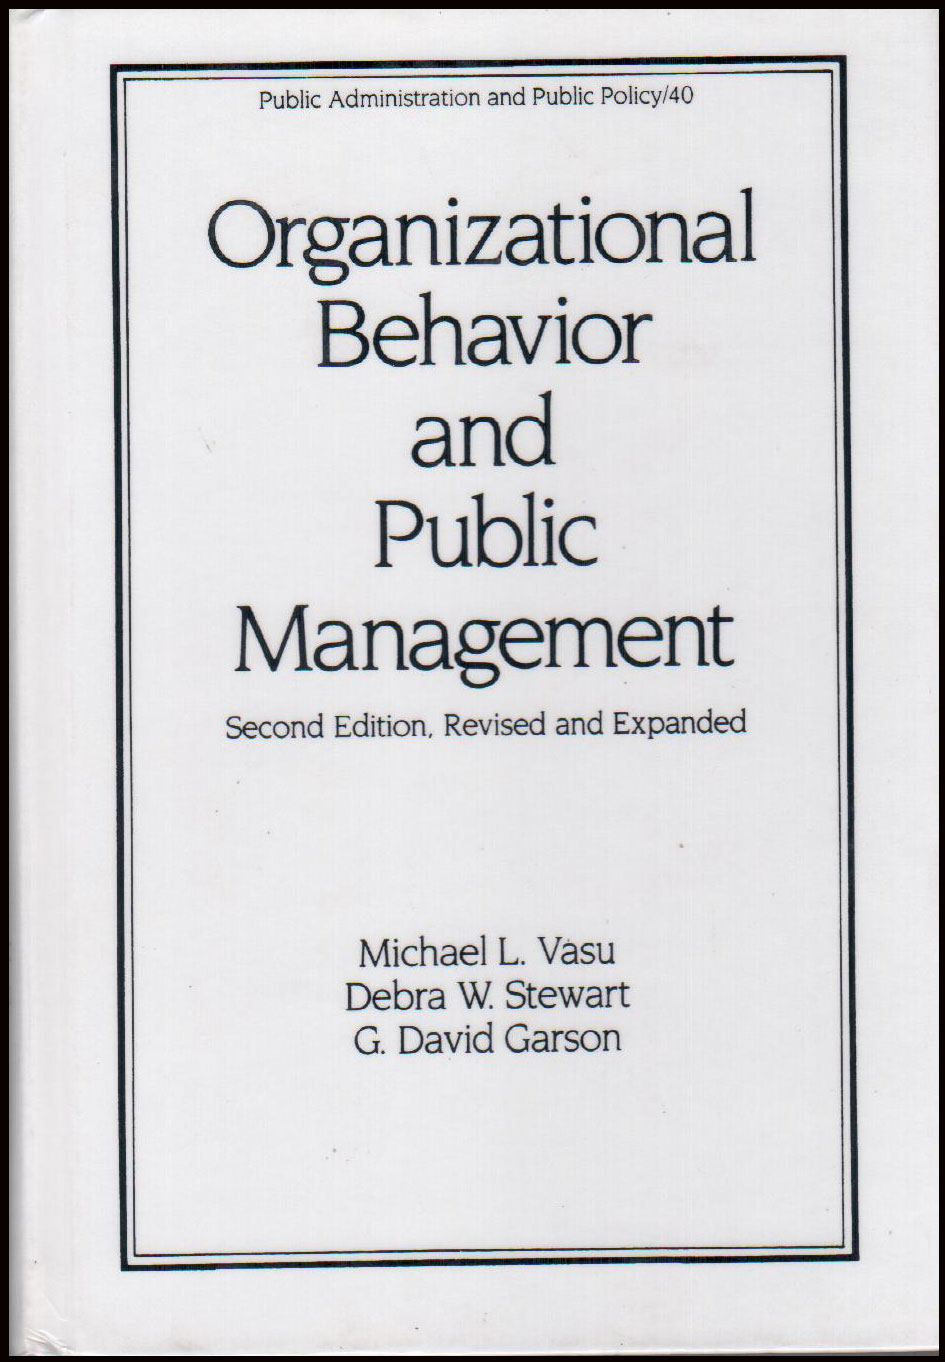 Organizational Behavior and Public Management, 2nd Edition, Revised and Expanded, Debra W